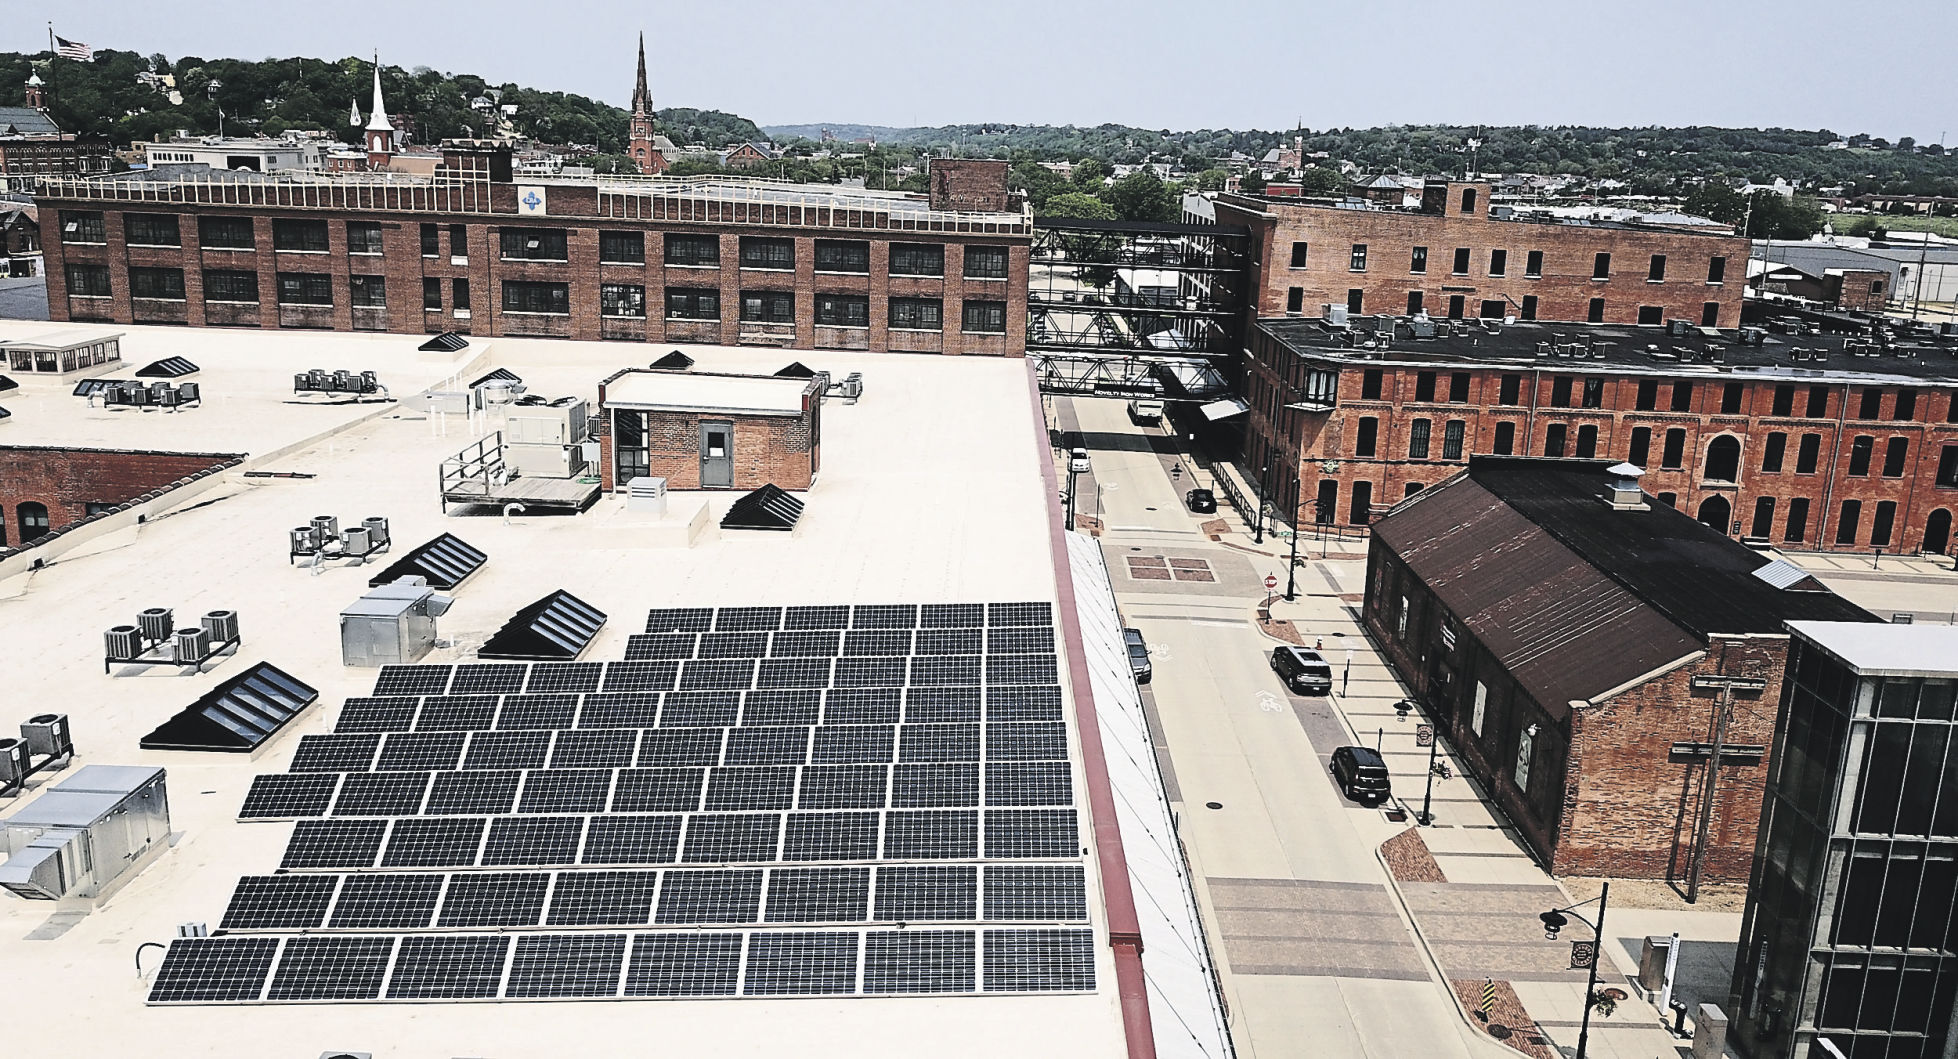 Solar panels in the Historic Millwork District in Dubuque. PHOTO CREDIT: Dave Kettering